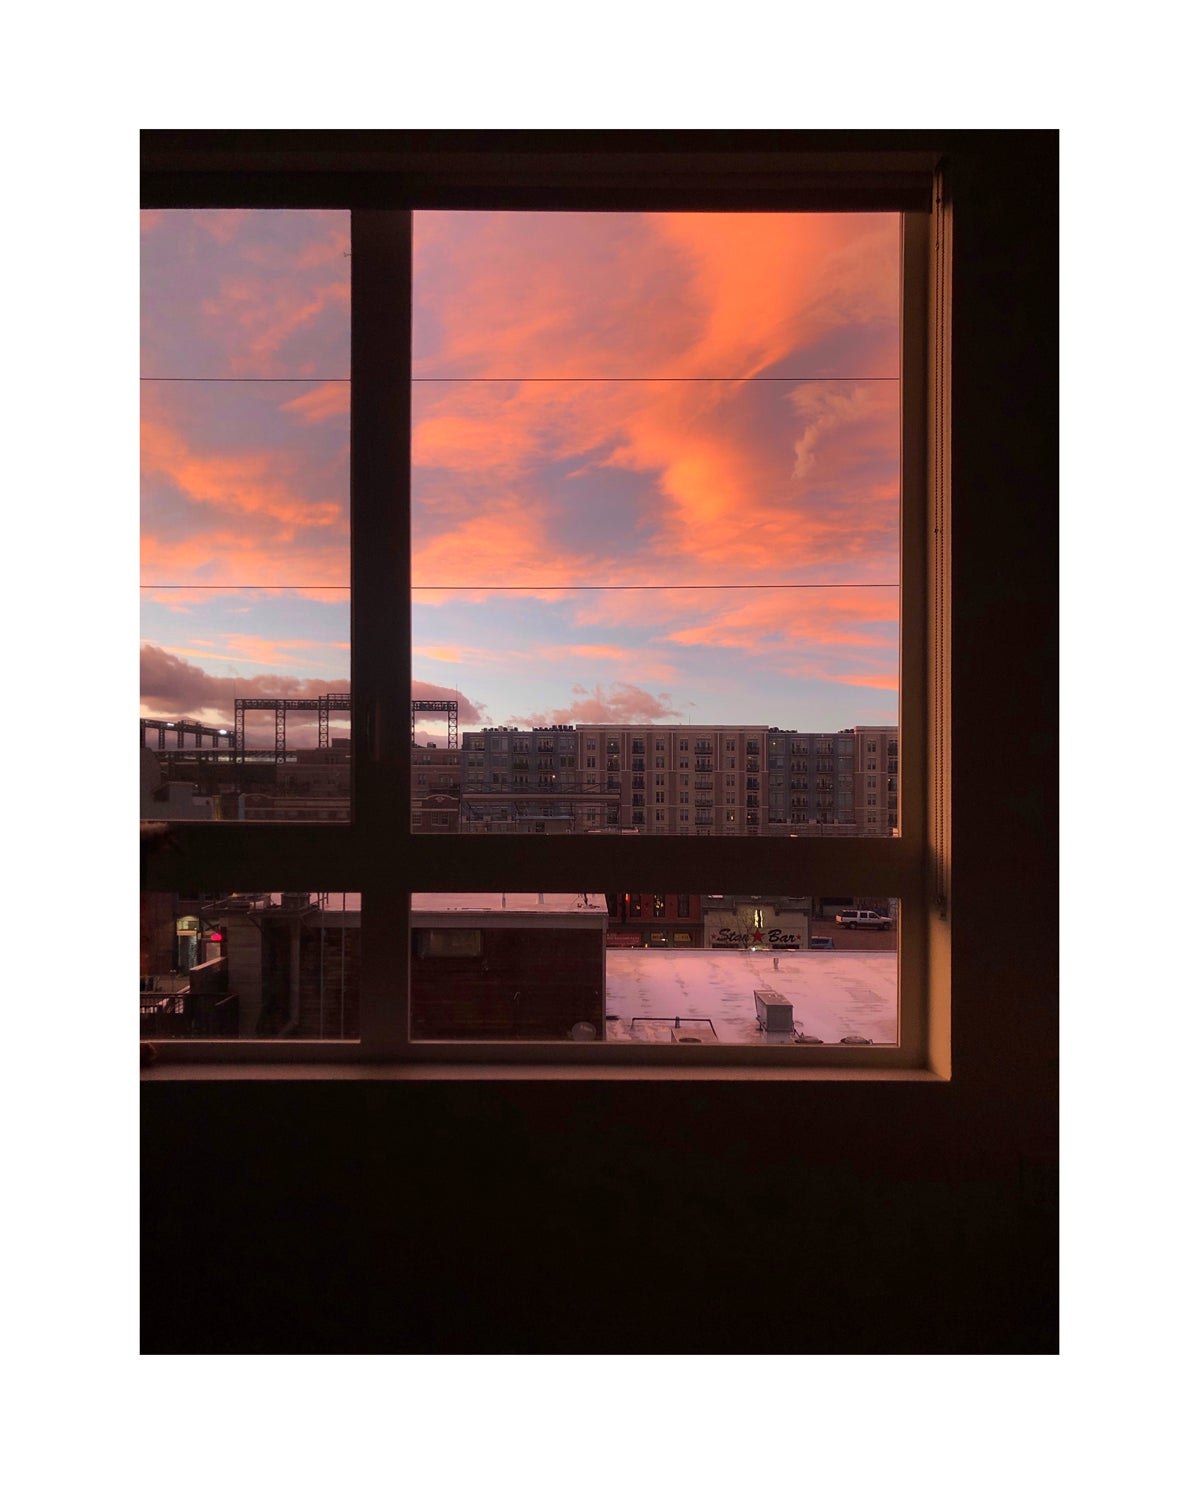 Photo of sunset through window by Molly Olwig